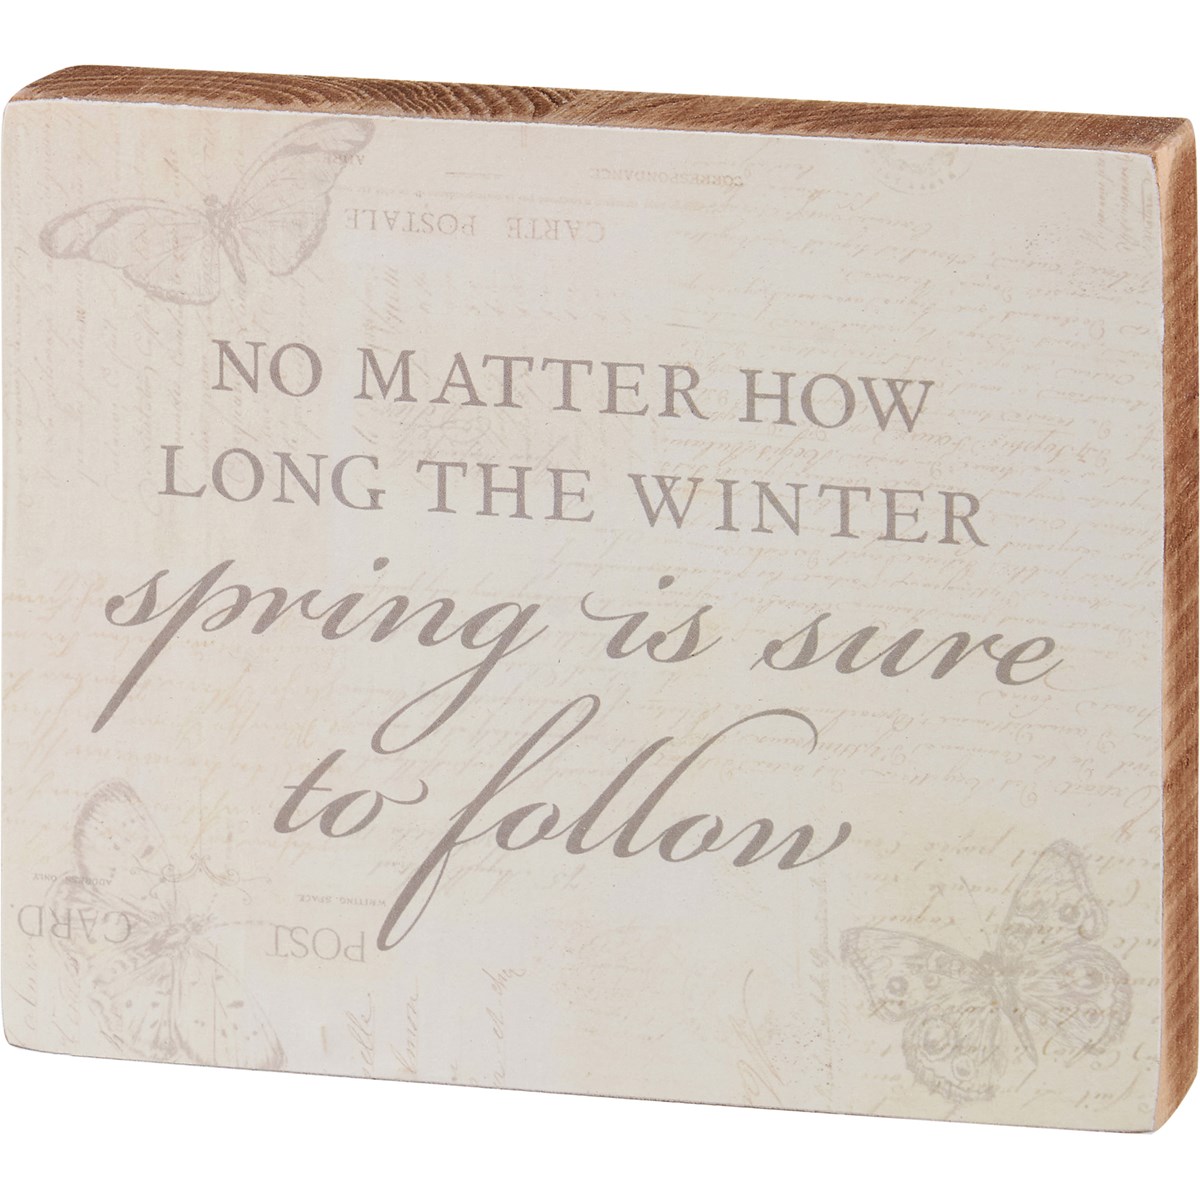 Spring Is Sure To Follow Block Sign - Wood, Paper